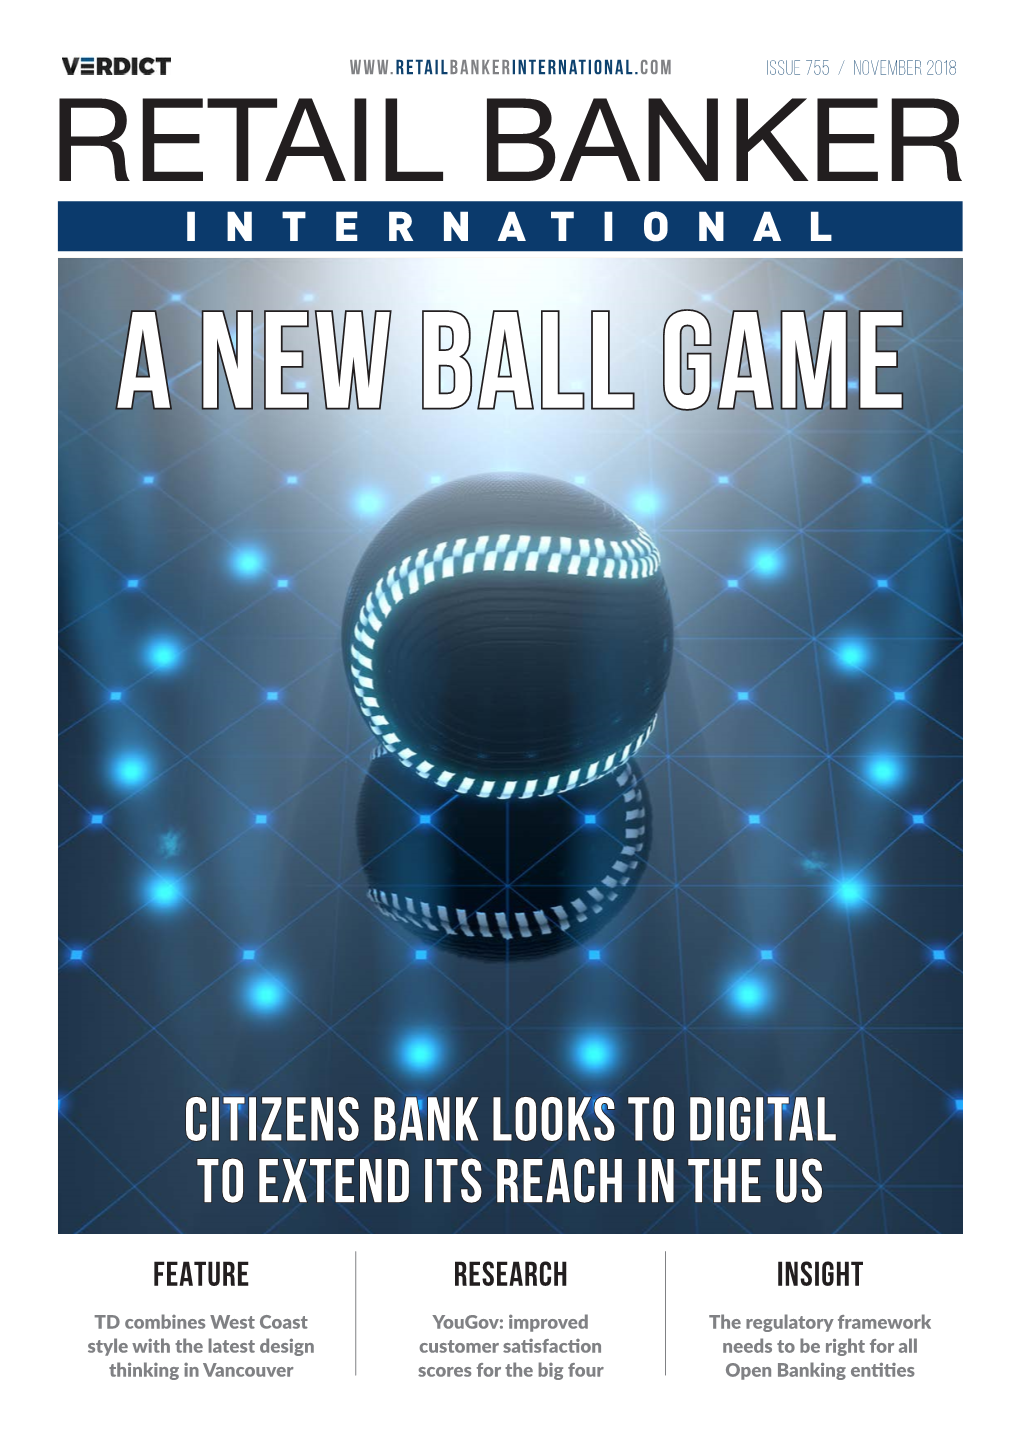 Citizens Bank Looks to Digital to Extend Its Reach in the Us